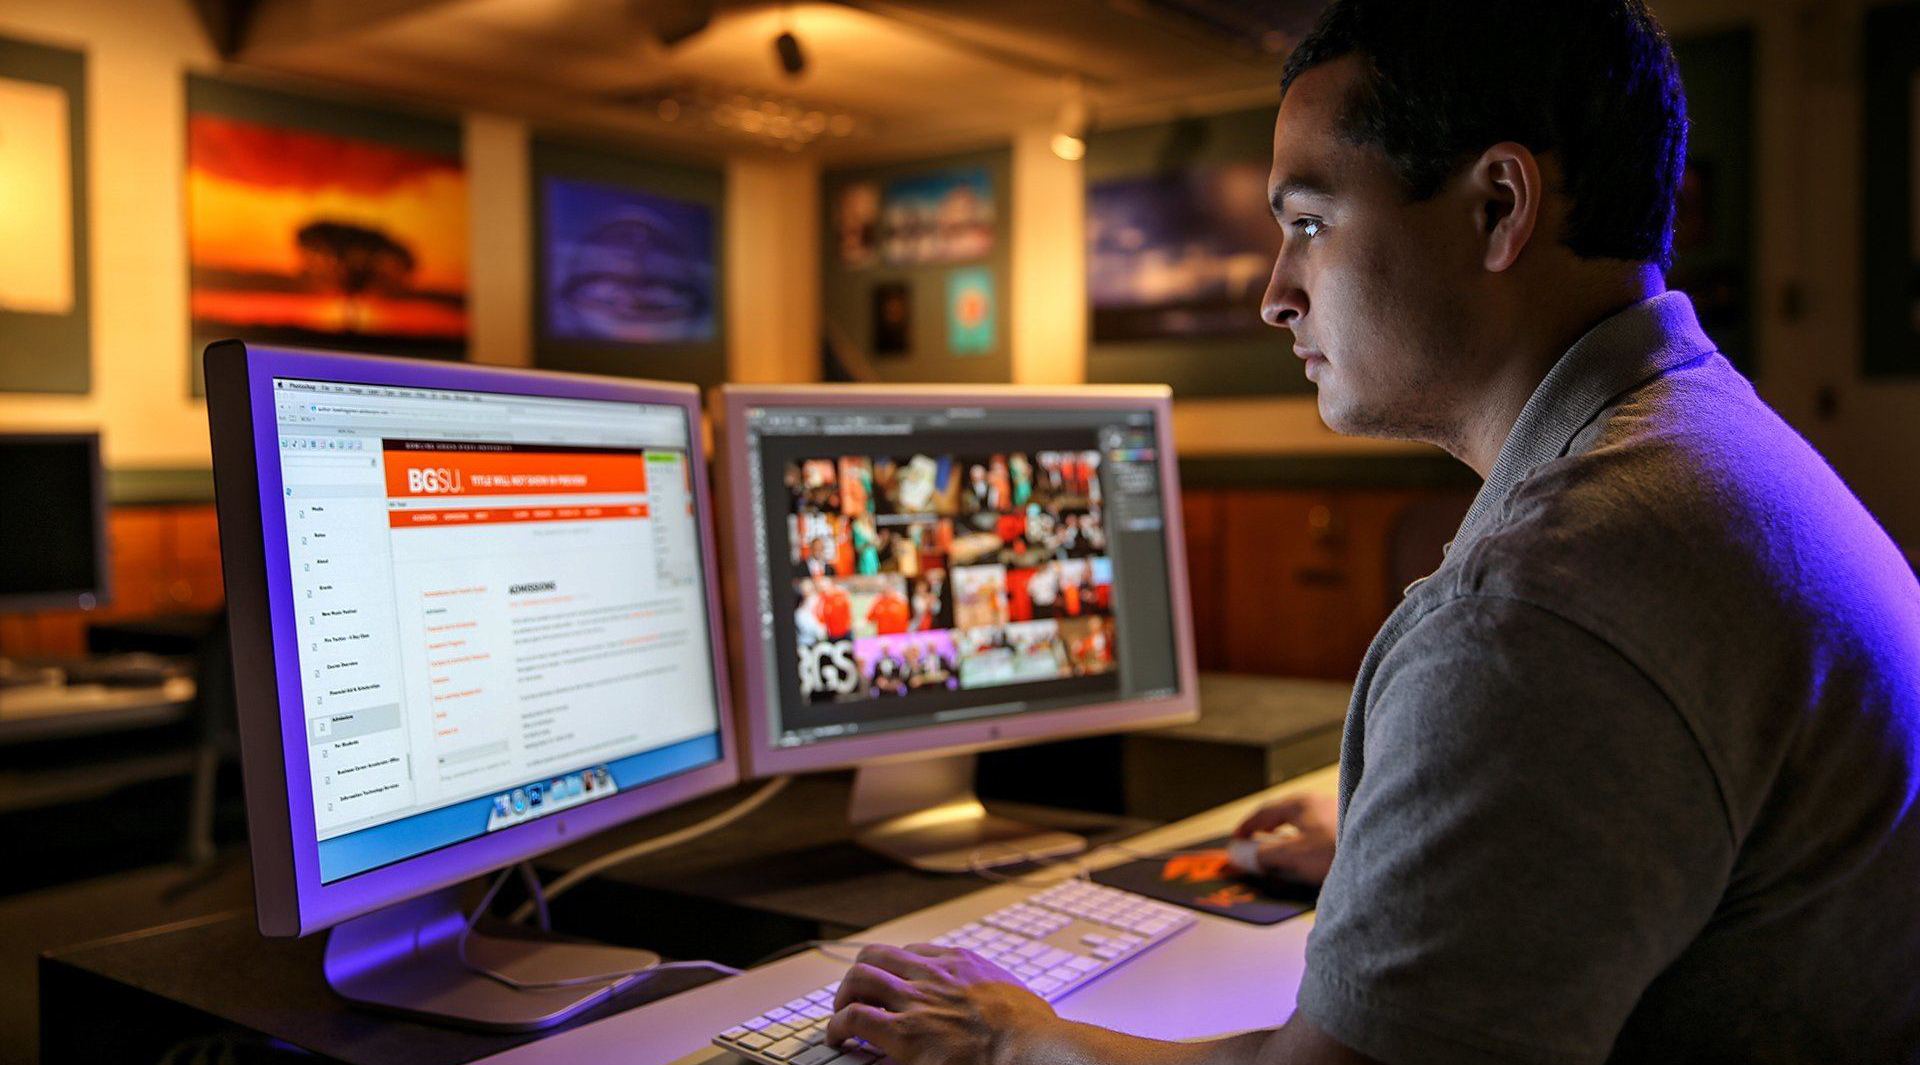 A male VCT student at BGSU sits in front of two computer monitors and works on the BGSU website.